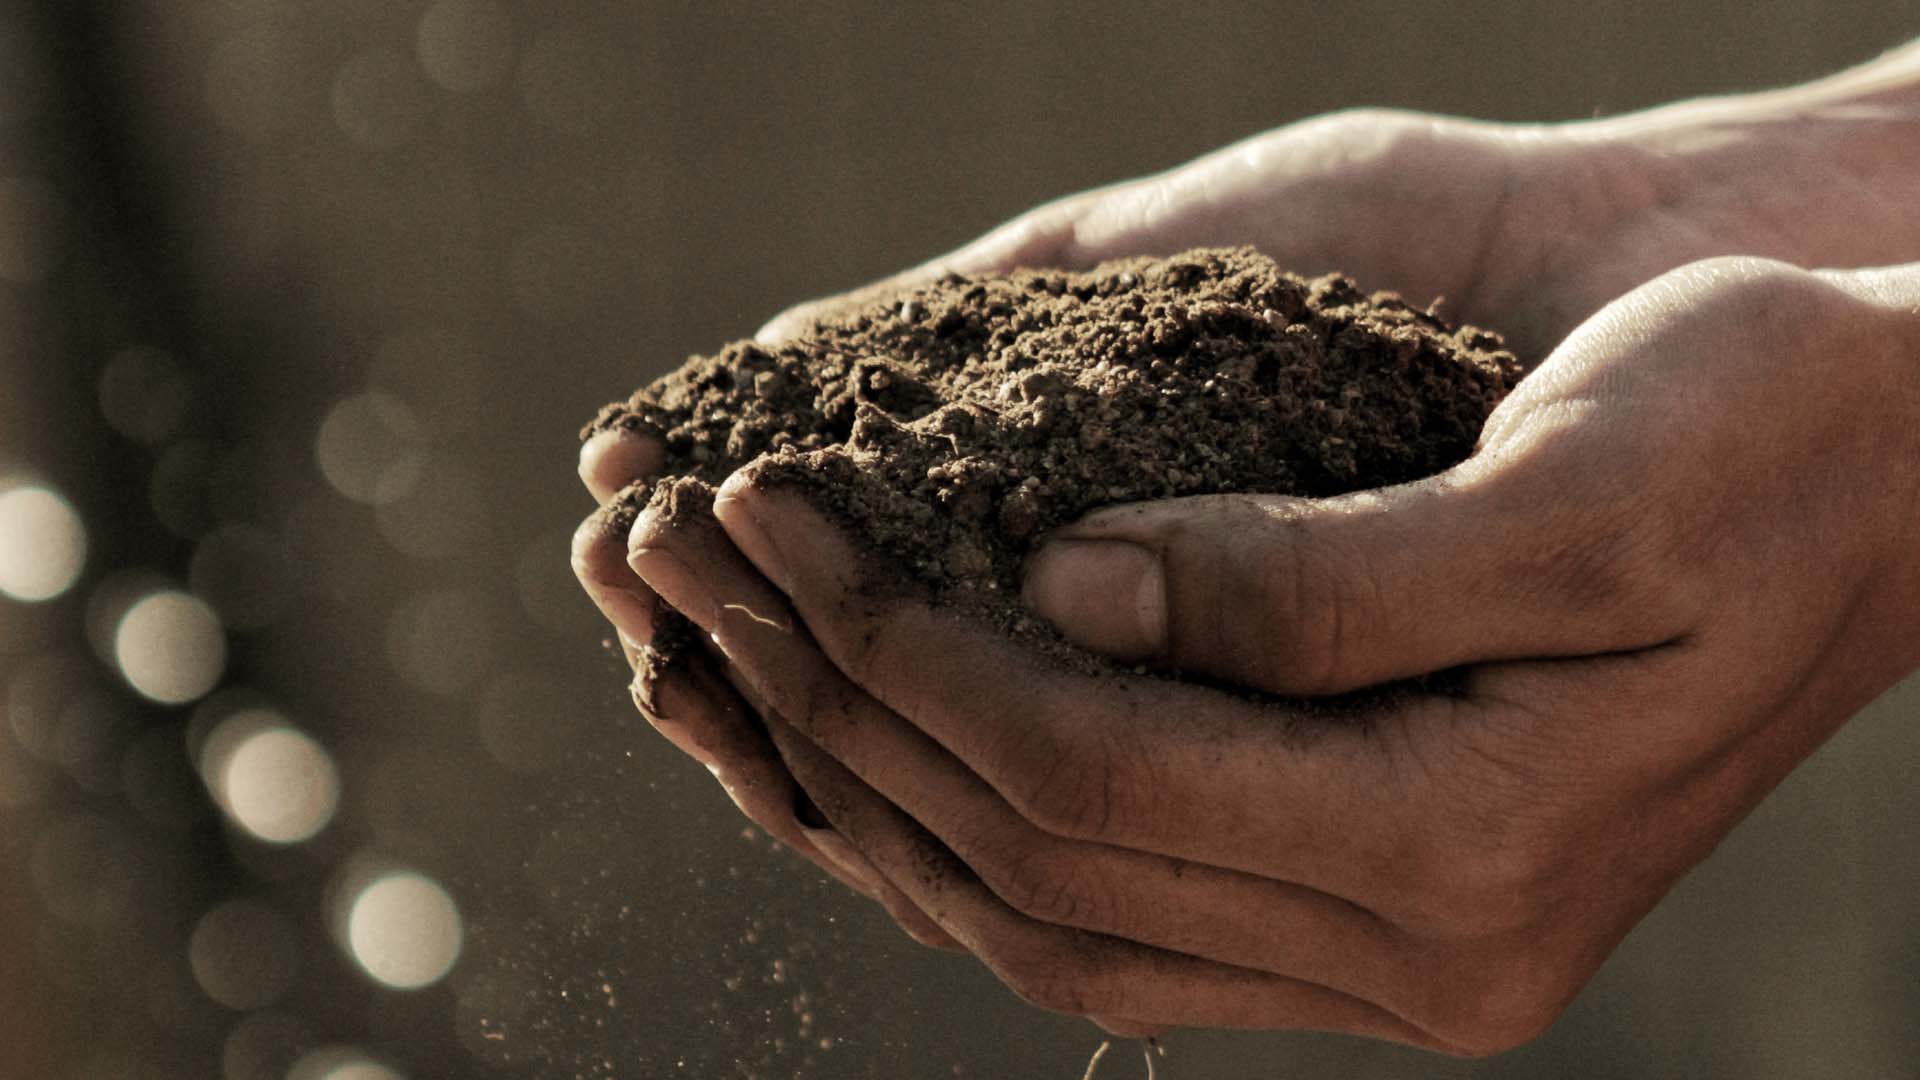 A close up of hands holding soil